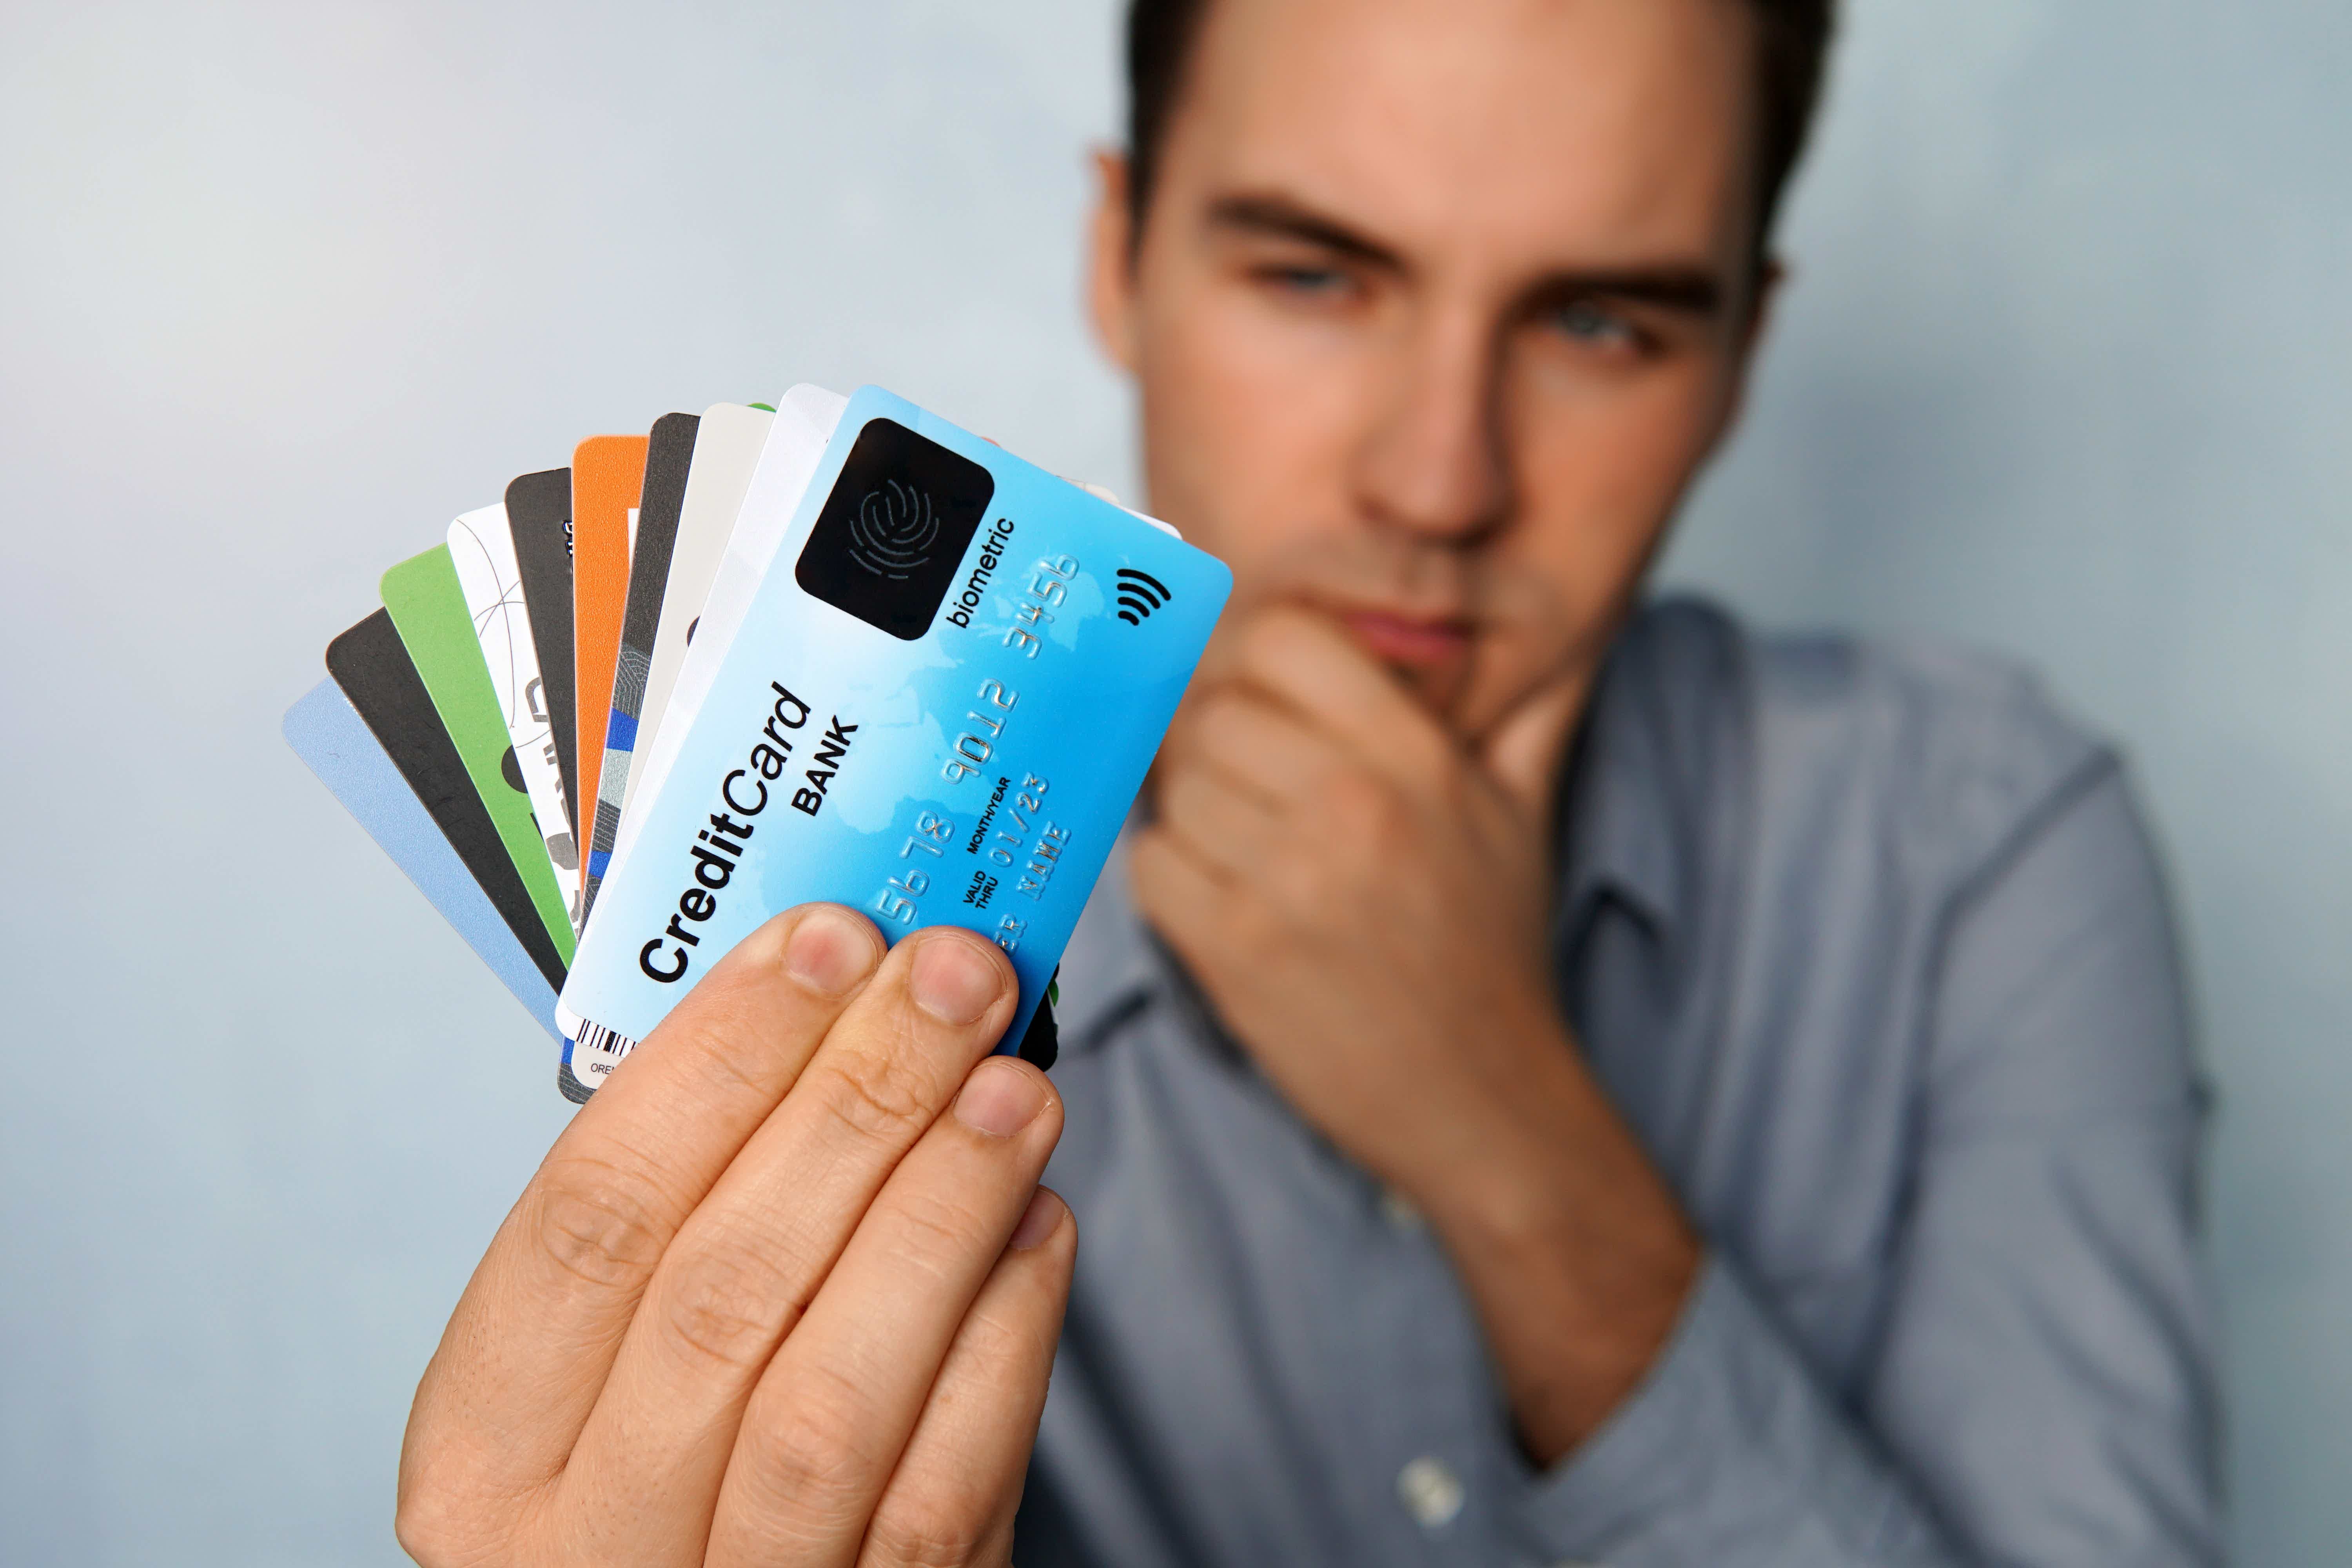 There are many credit cards in the market, but which one suits your needs? Source: Adobe Stock.